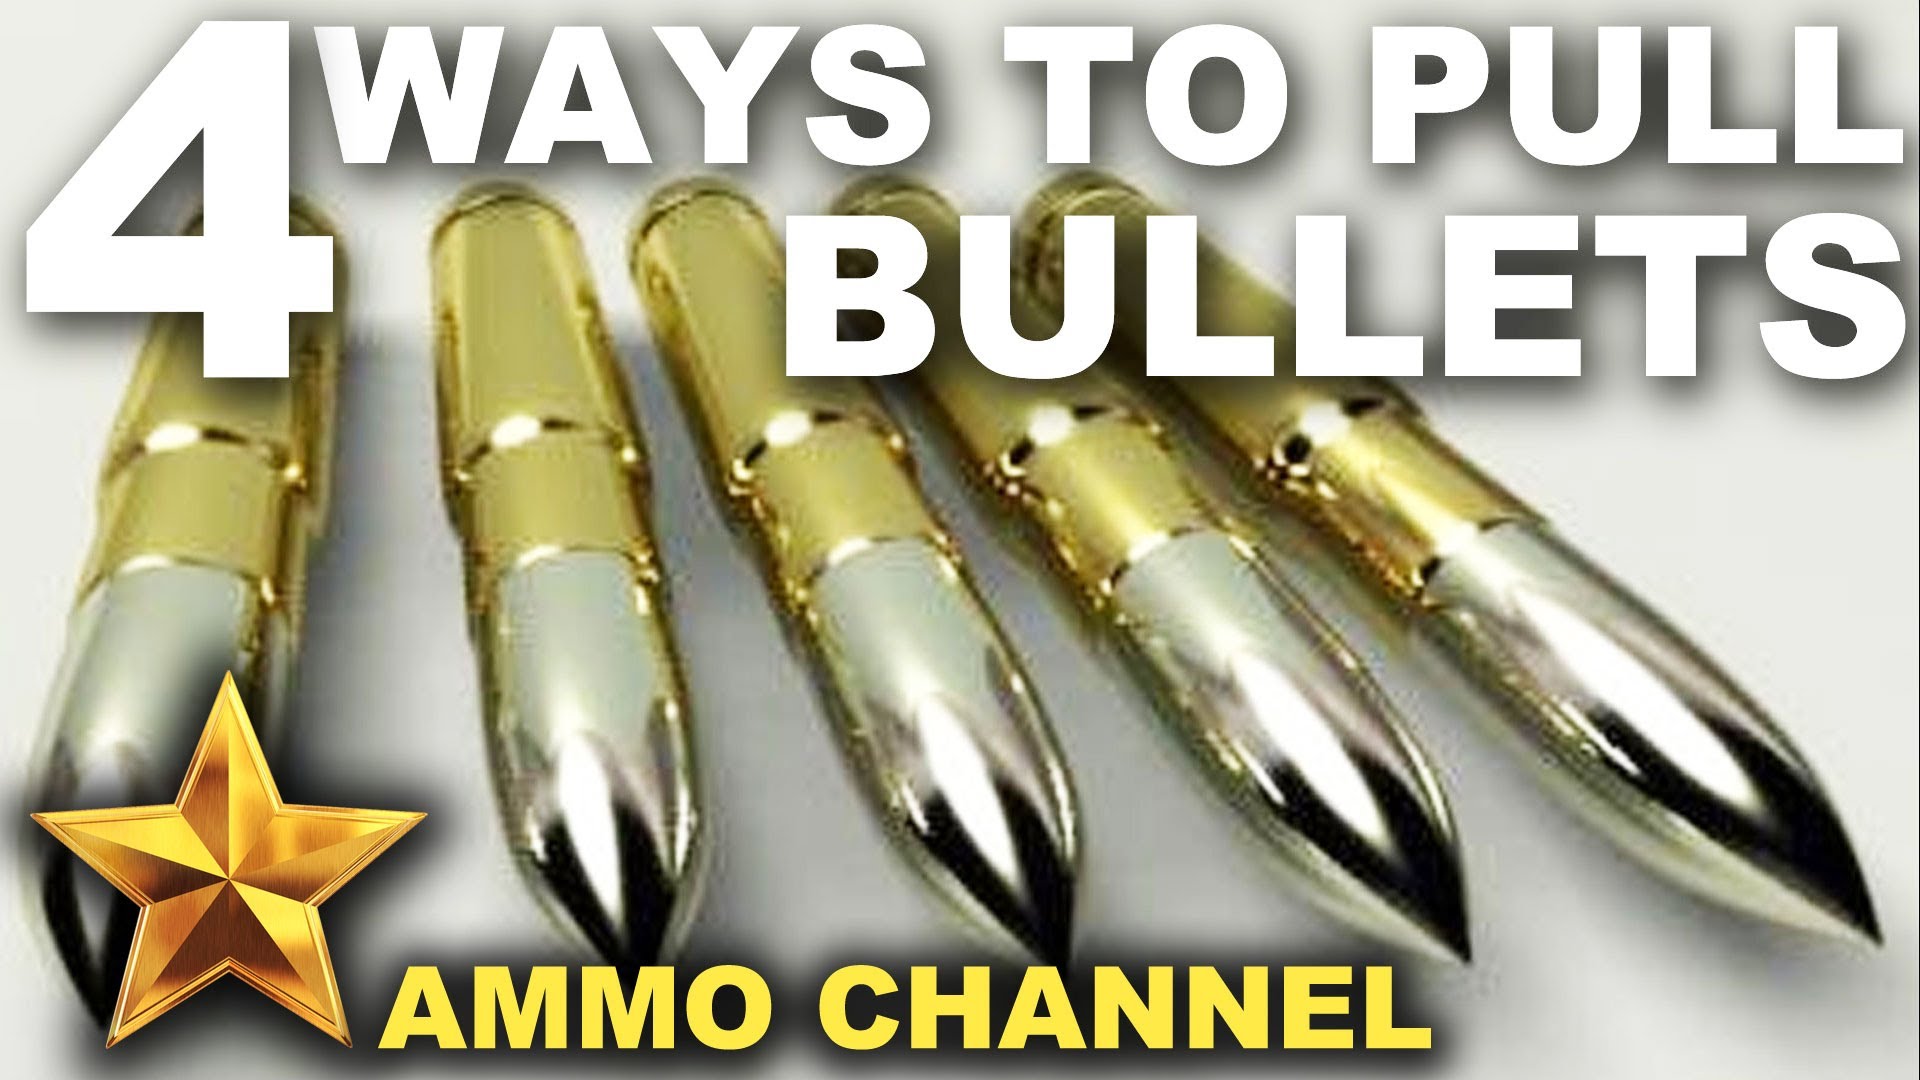 4 Ways to Pull Bullets - Reloading Tips - YouTube